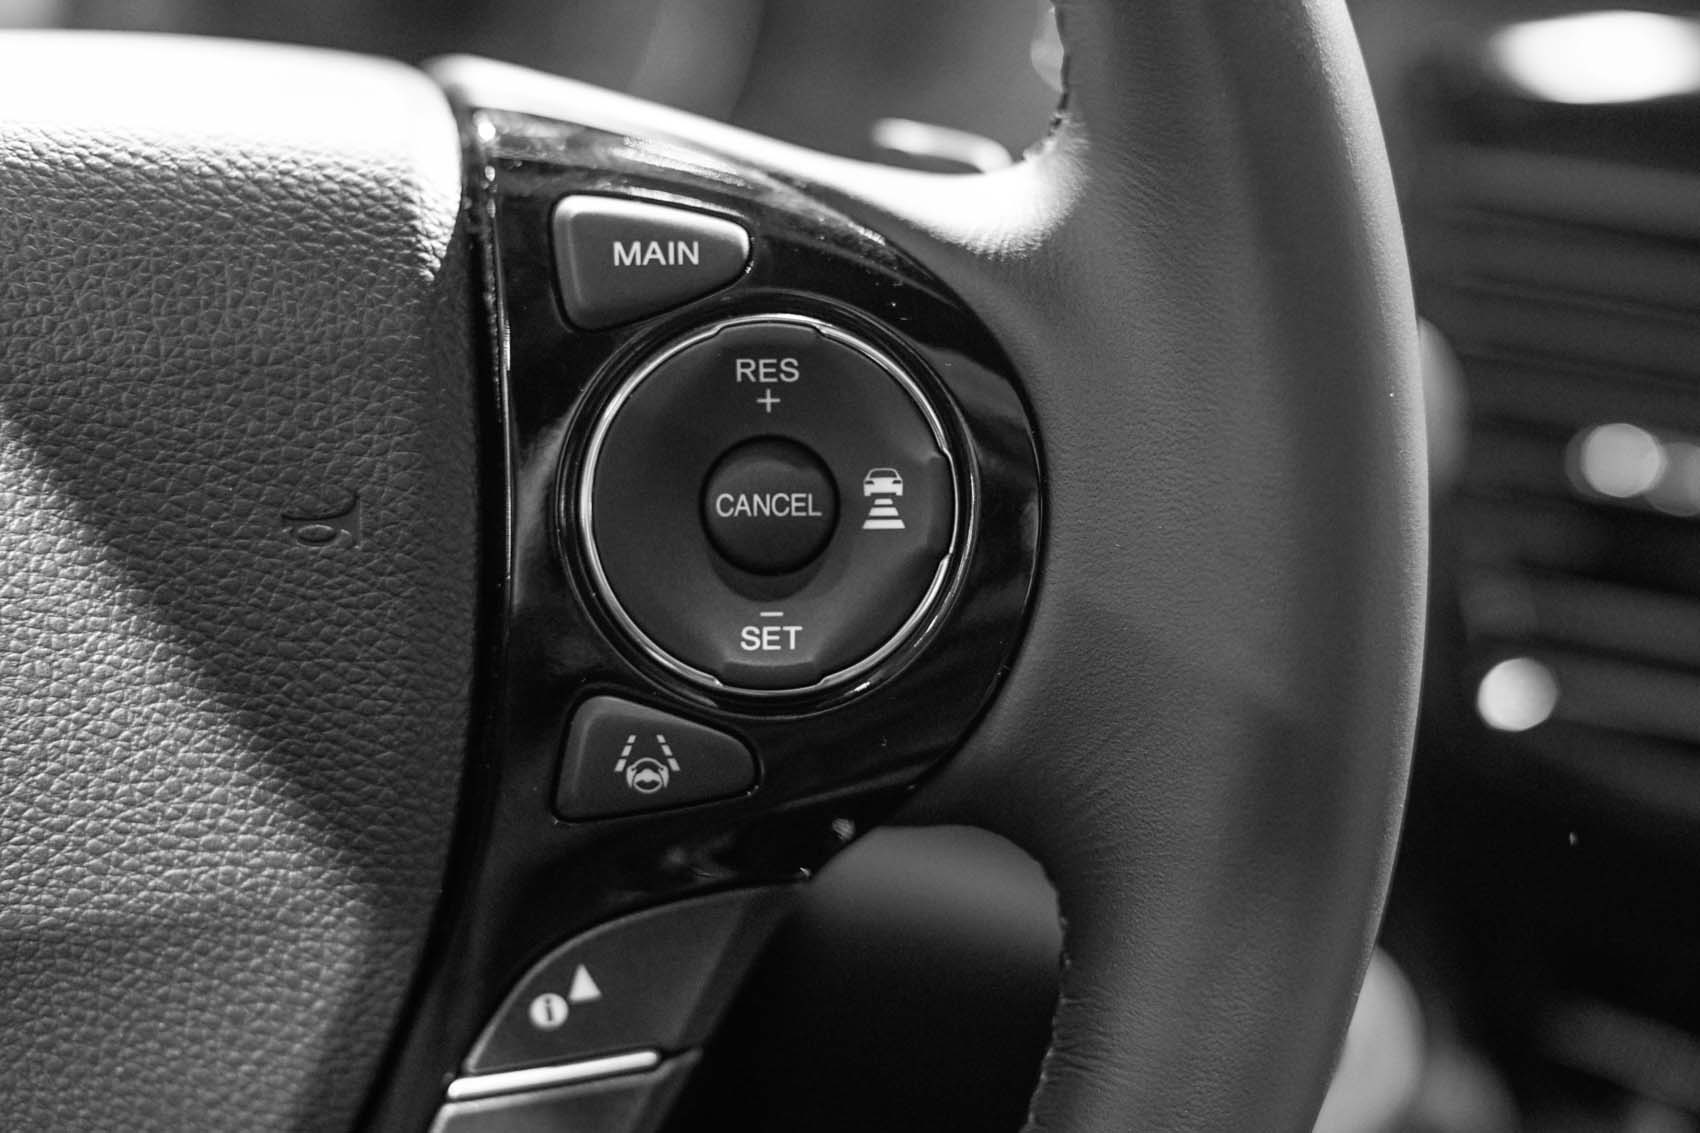 Why Is My Cruise Control Not Working? Causes & Cost to Fix